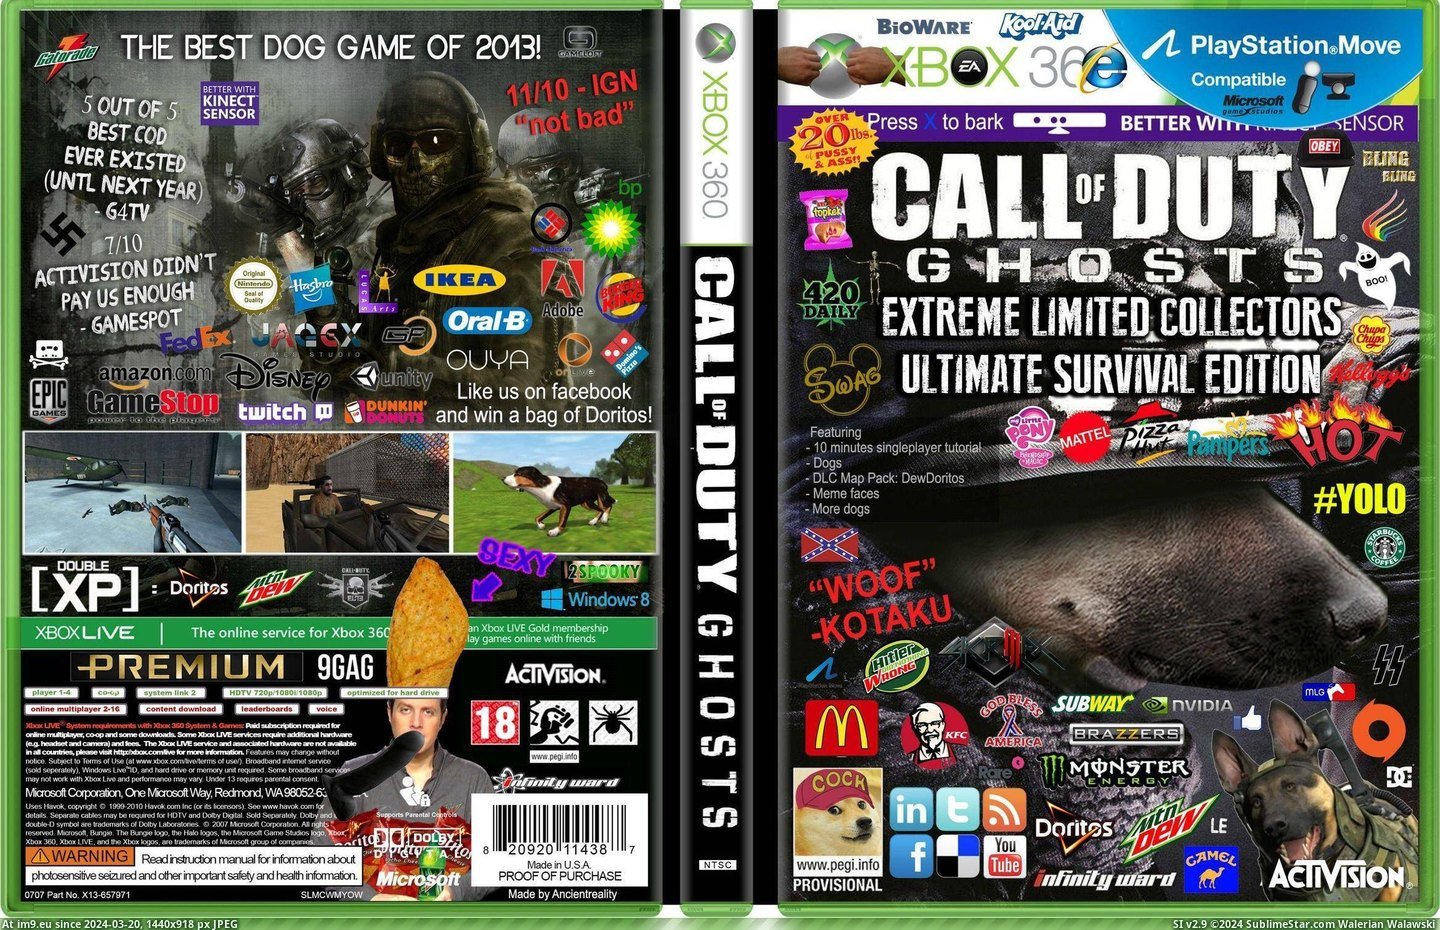 #Gaming #Cod #Boxart #Ghosts [Gaming] CoD: Ghosts boxart according to -v- Pic. (Изображение из альбом My r/GAMING favs))